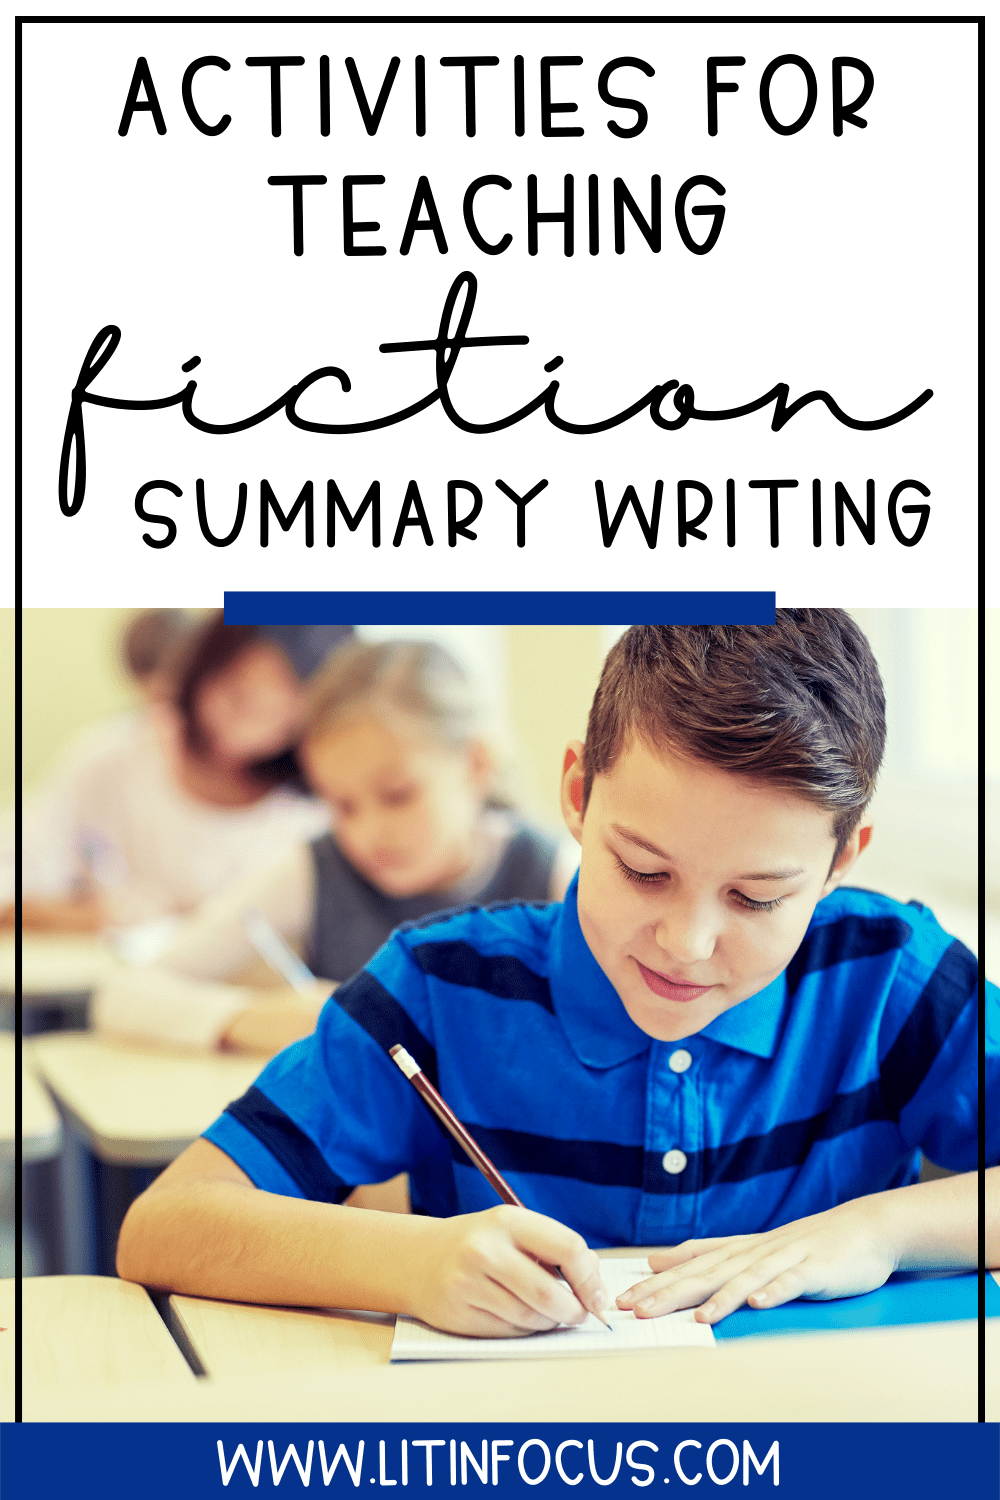 Activities for Teaching Fiction Summary Writing